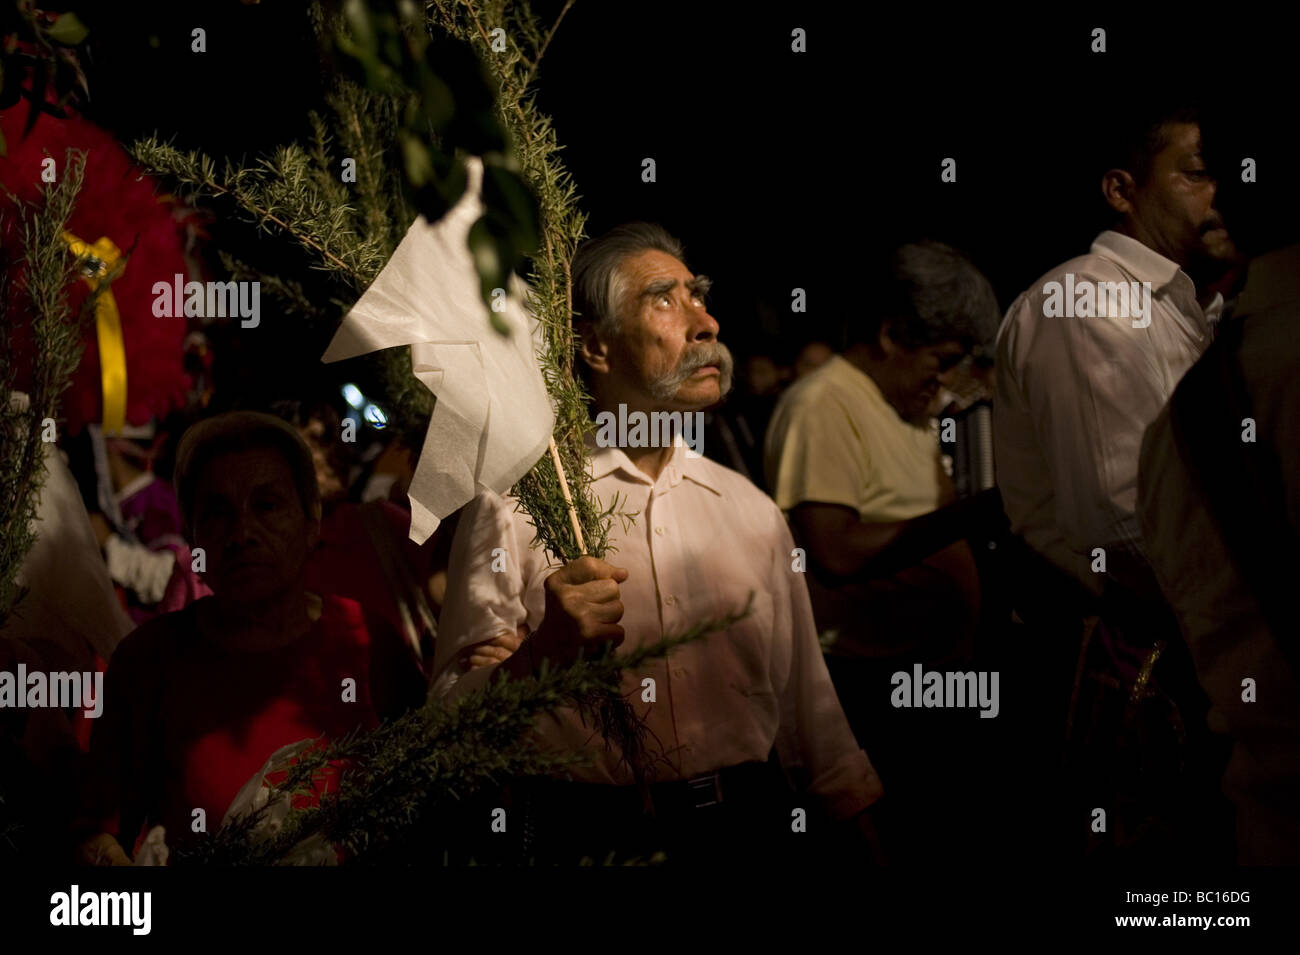 A man looks up at a statue of the resurrected Christ, unseen, during a holy week procession. Stock Photo